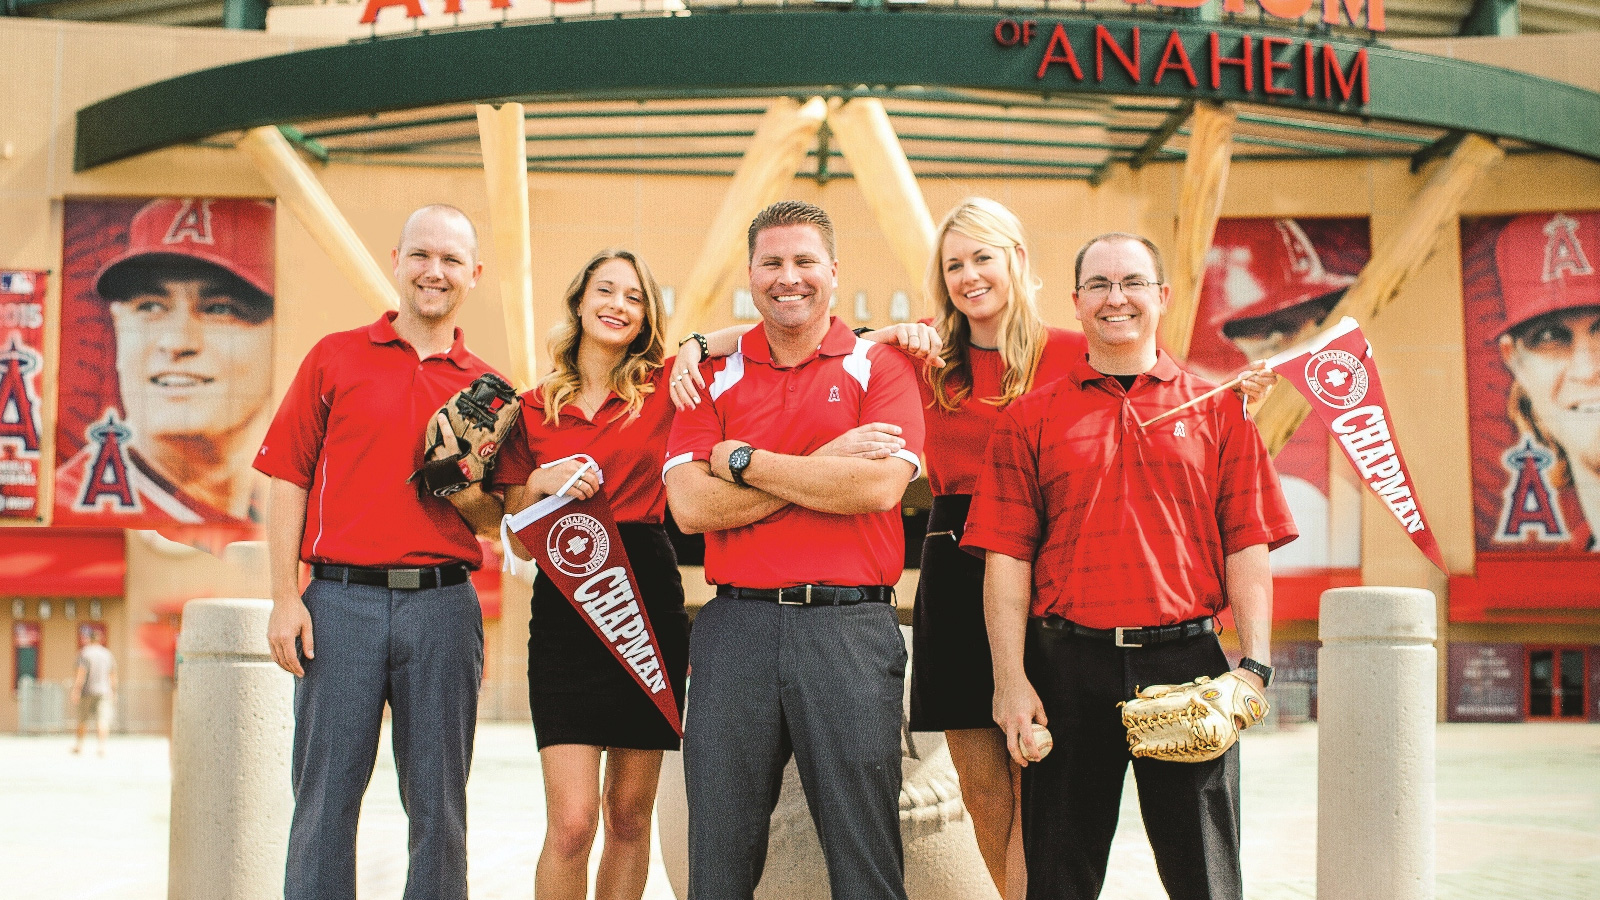 Chapman Alumni that work with the Angels